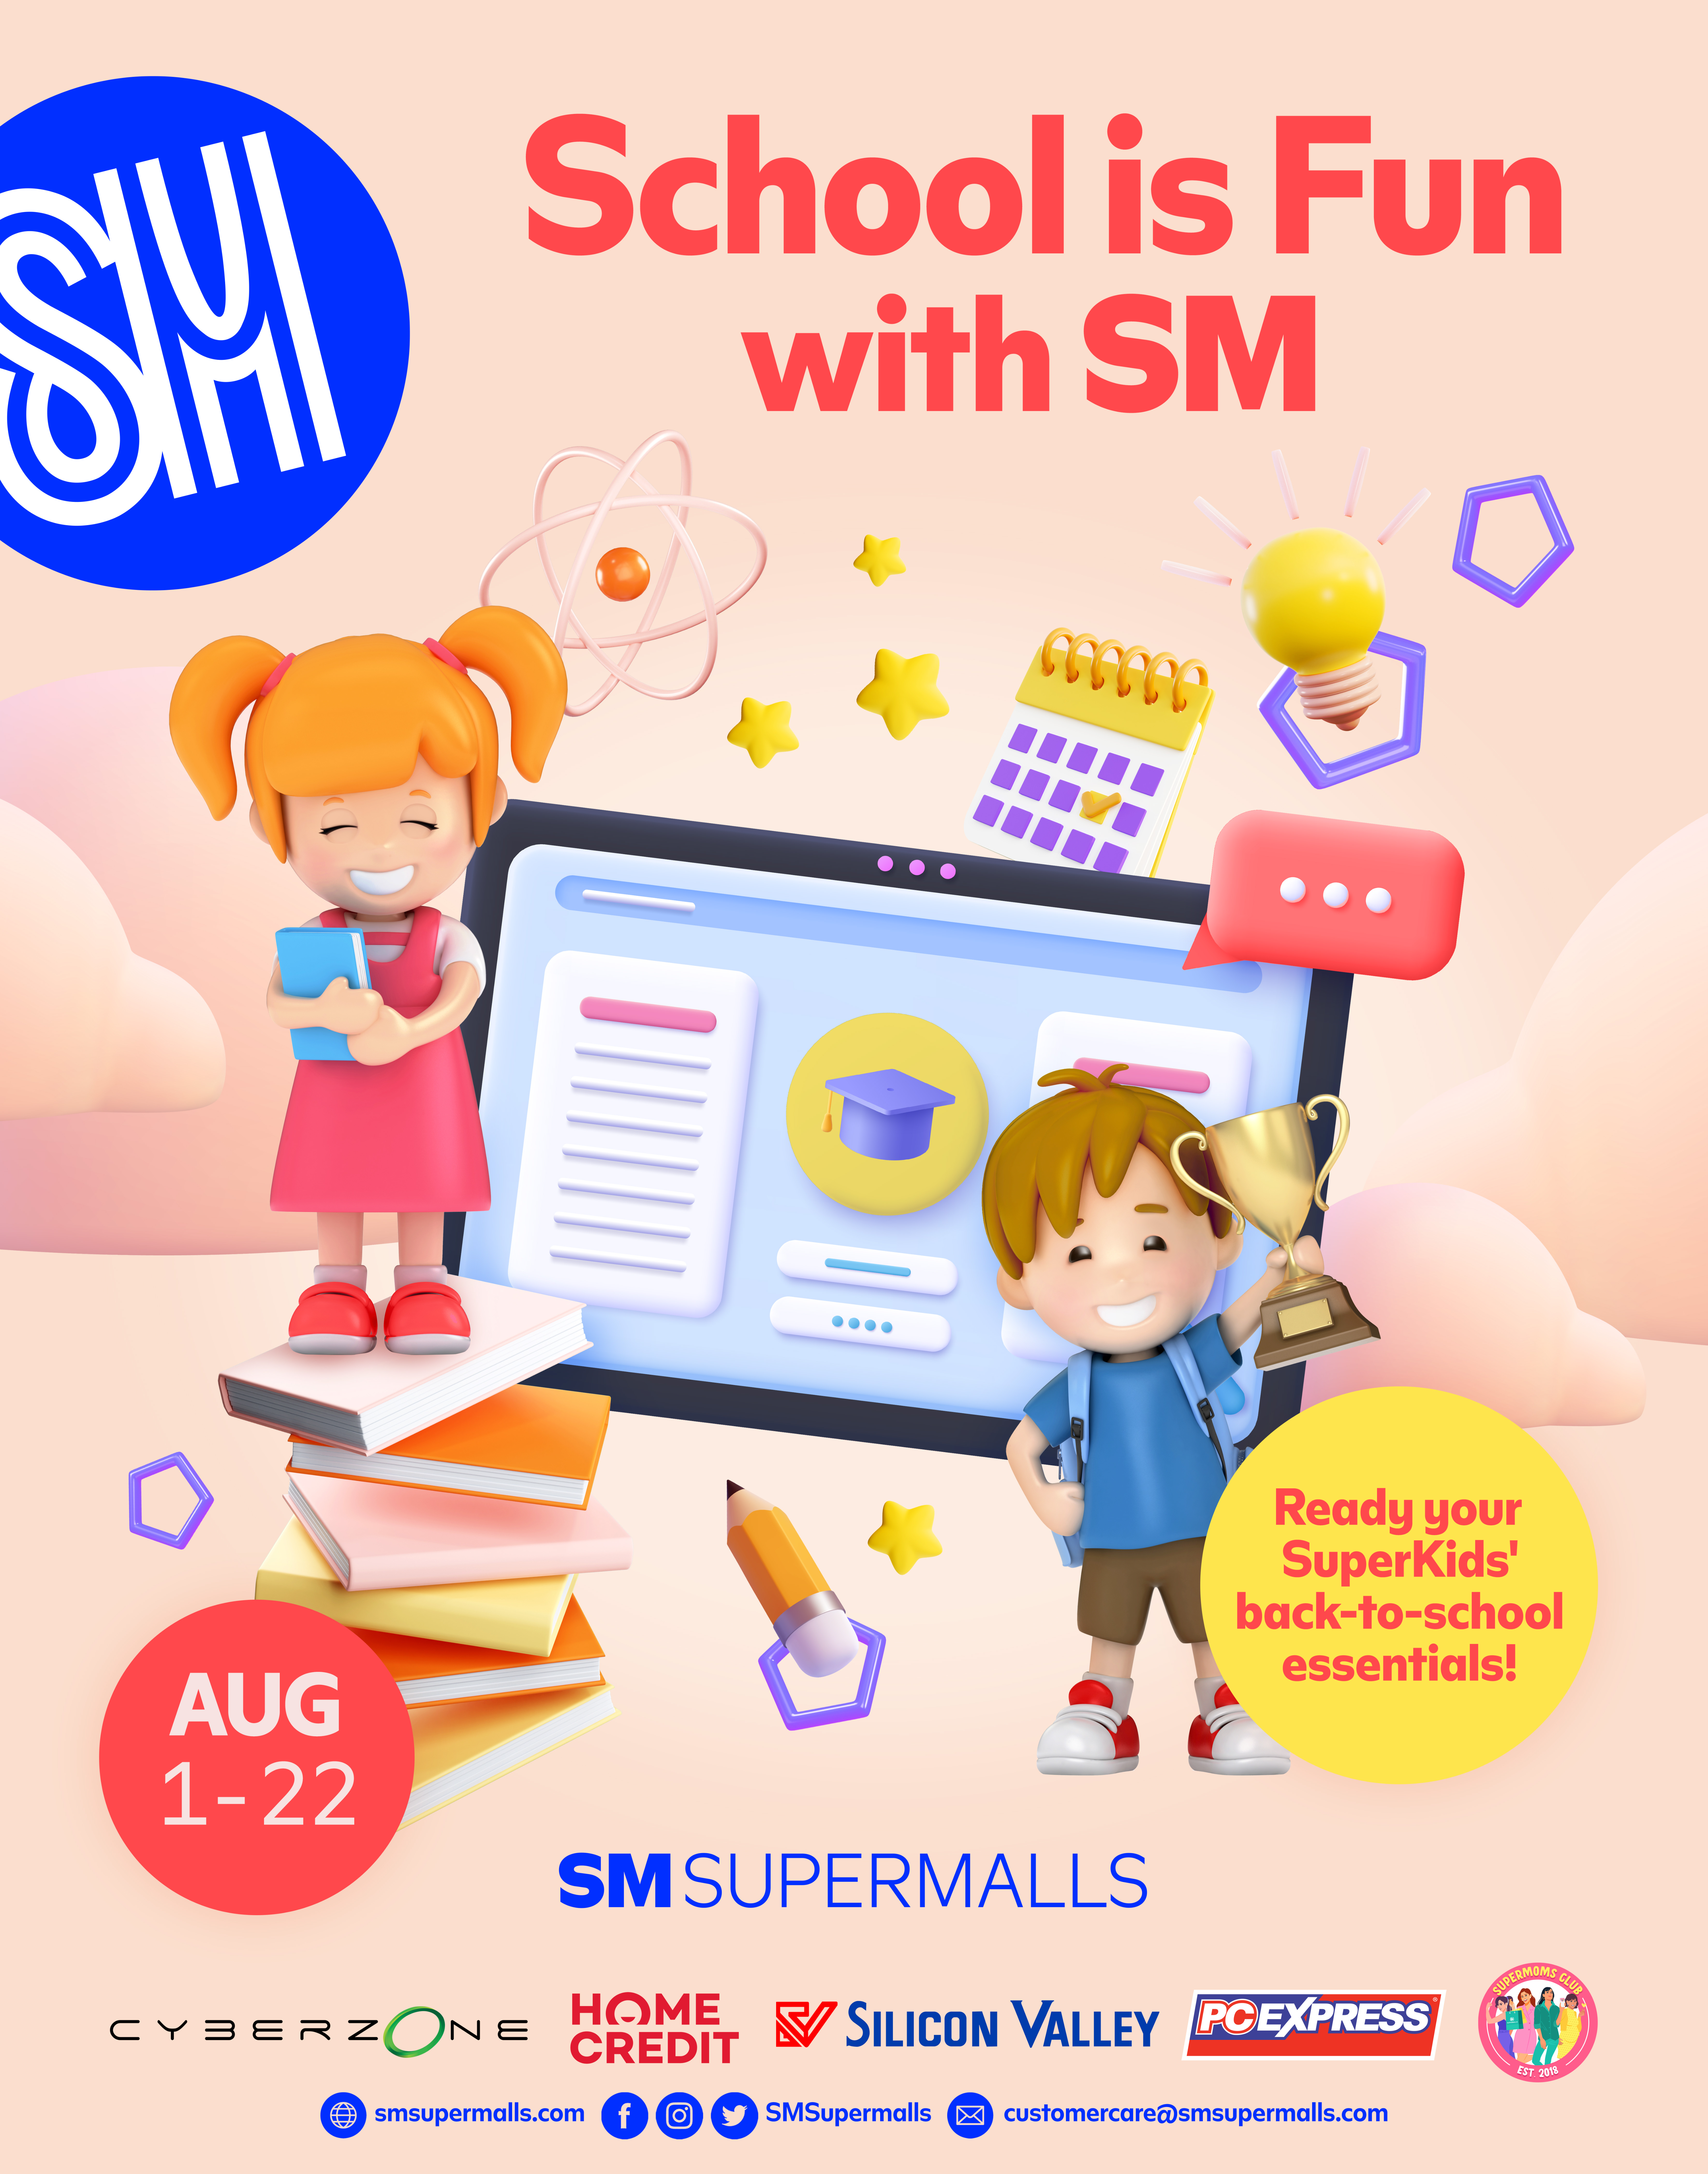 School is more fun with SM!